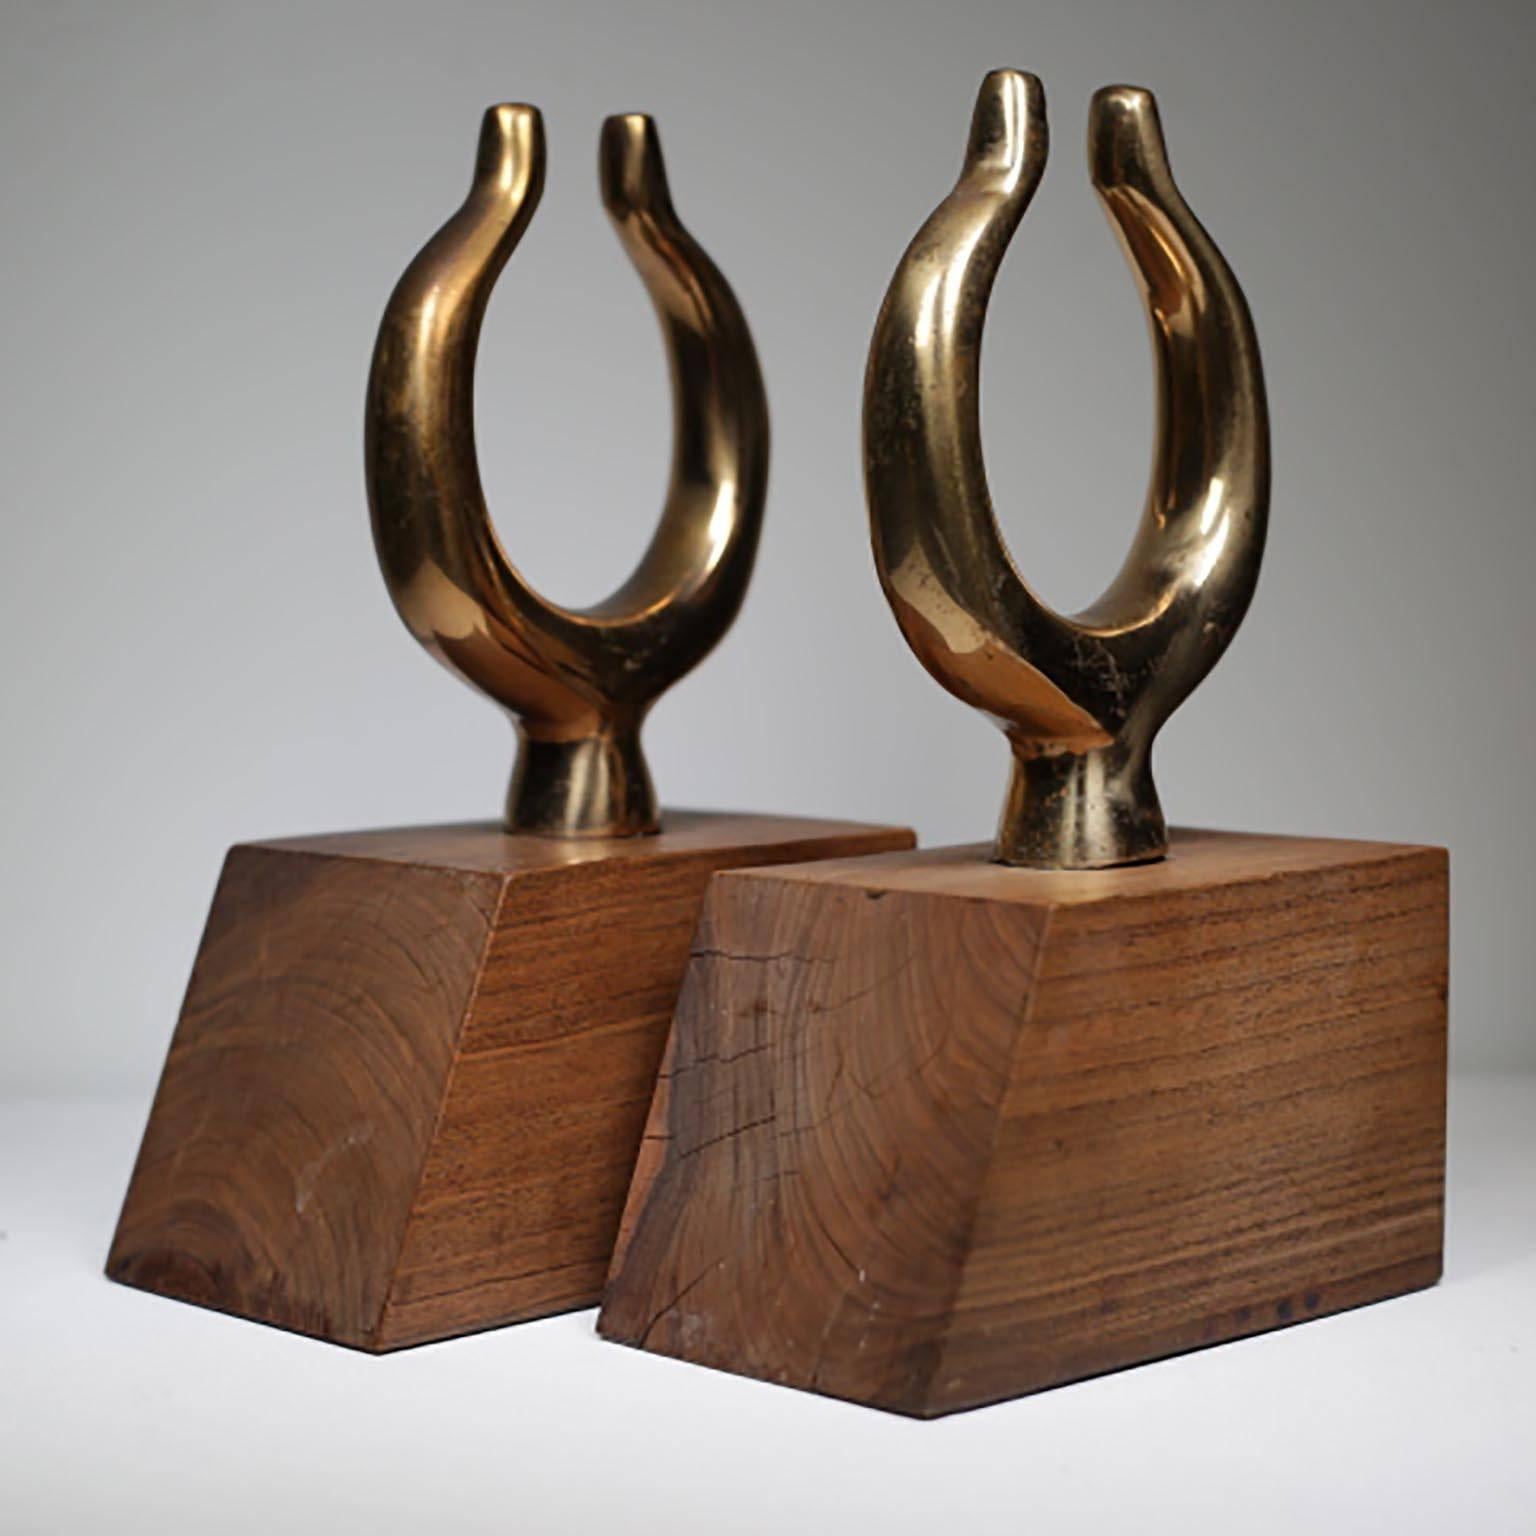 Pair of 19th century solid brass oar locks mounted on a mid-century wooden base, circa 1960s.